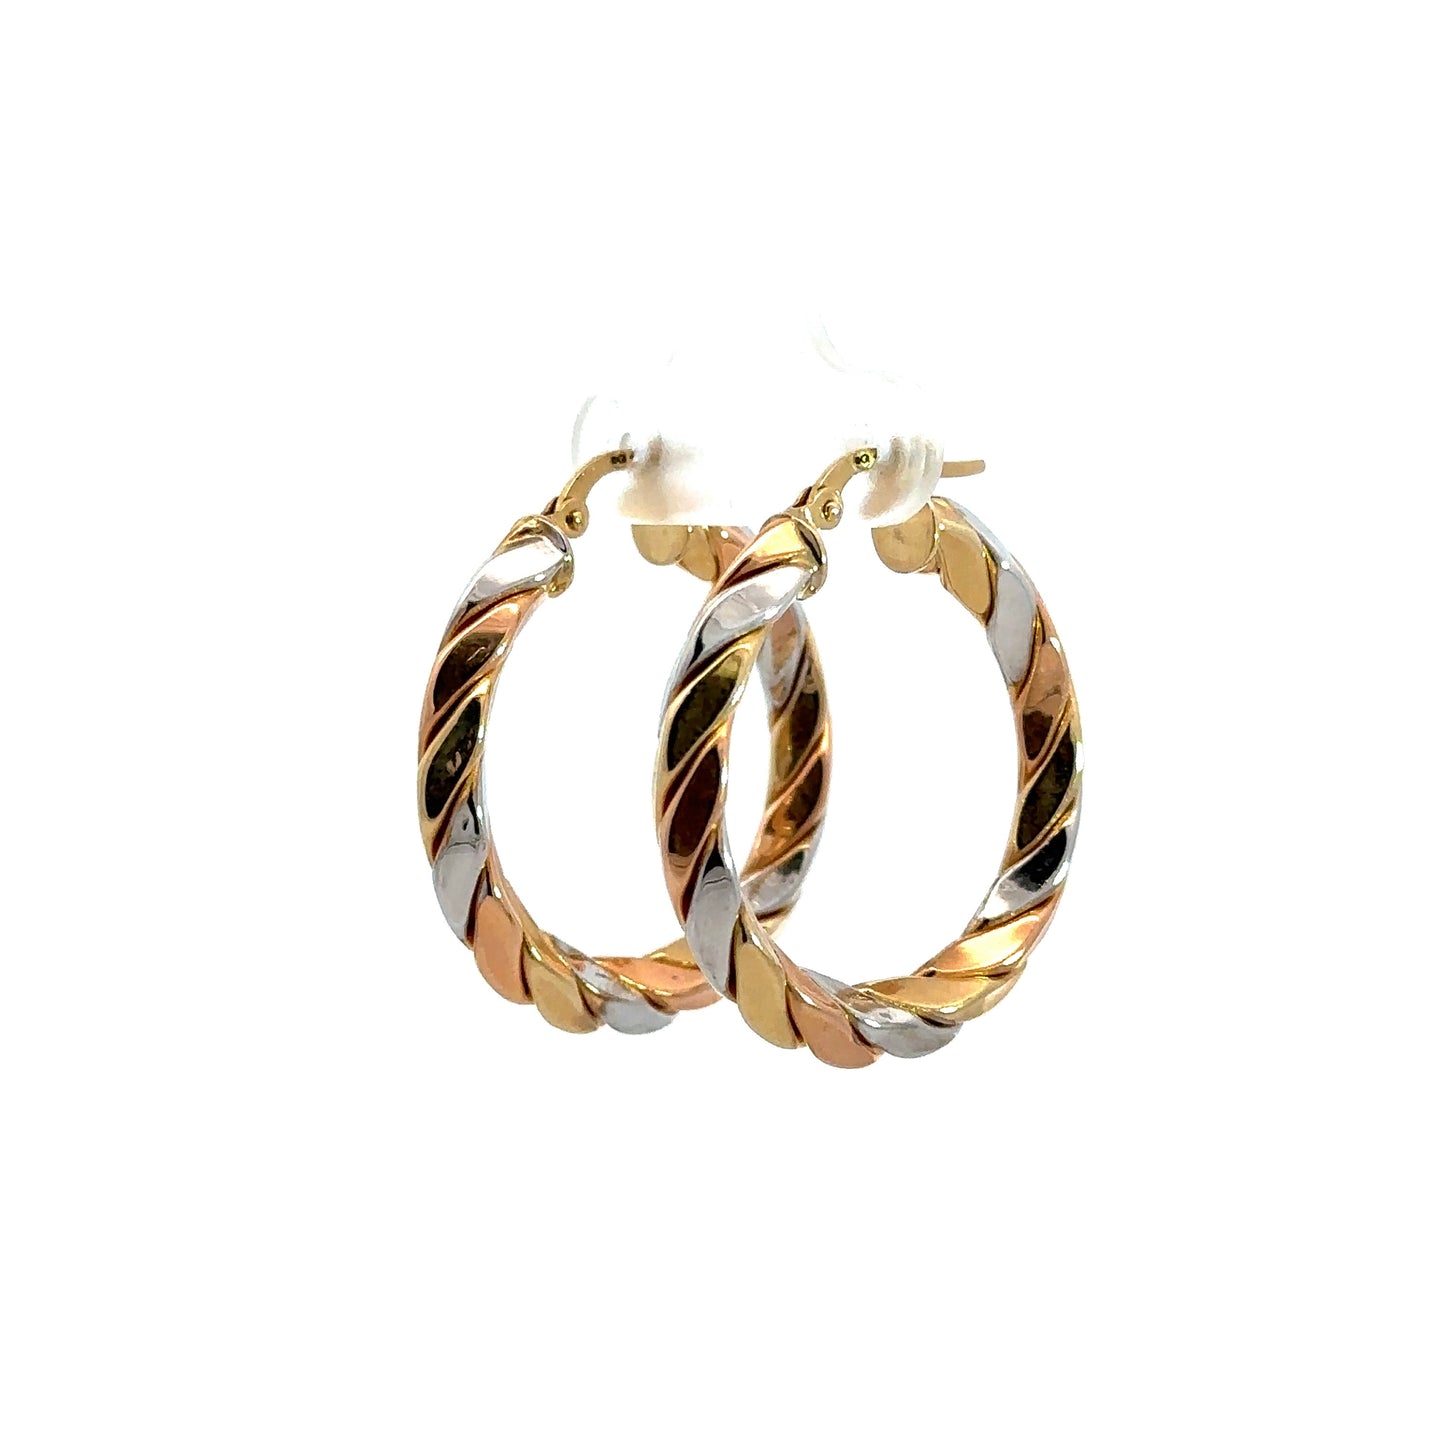 Diagonal view of tri-color gold hoops